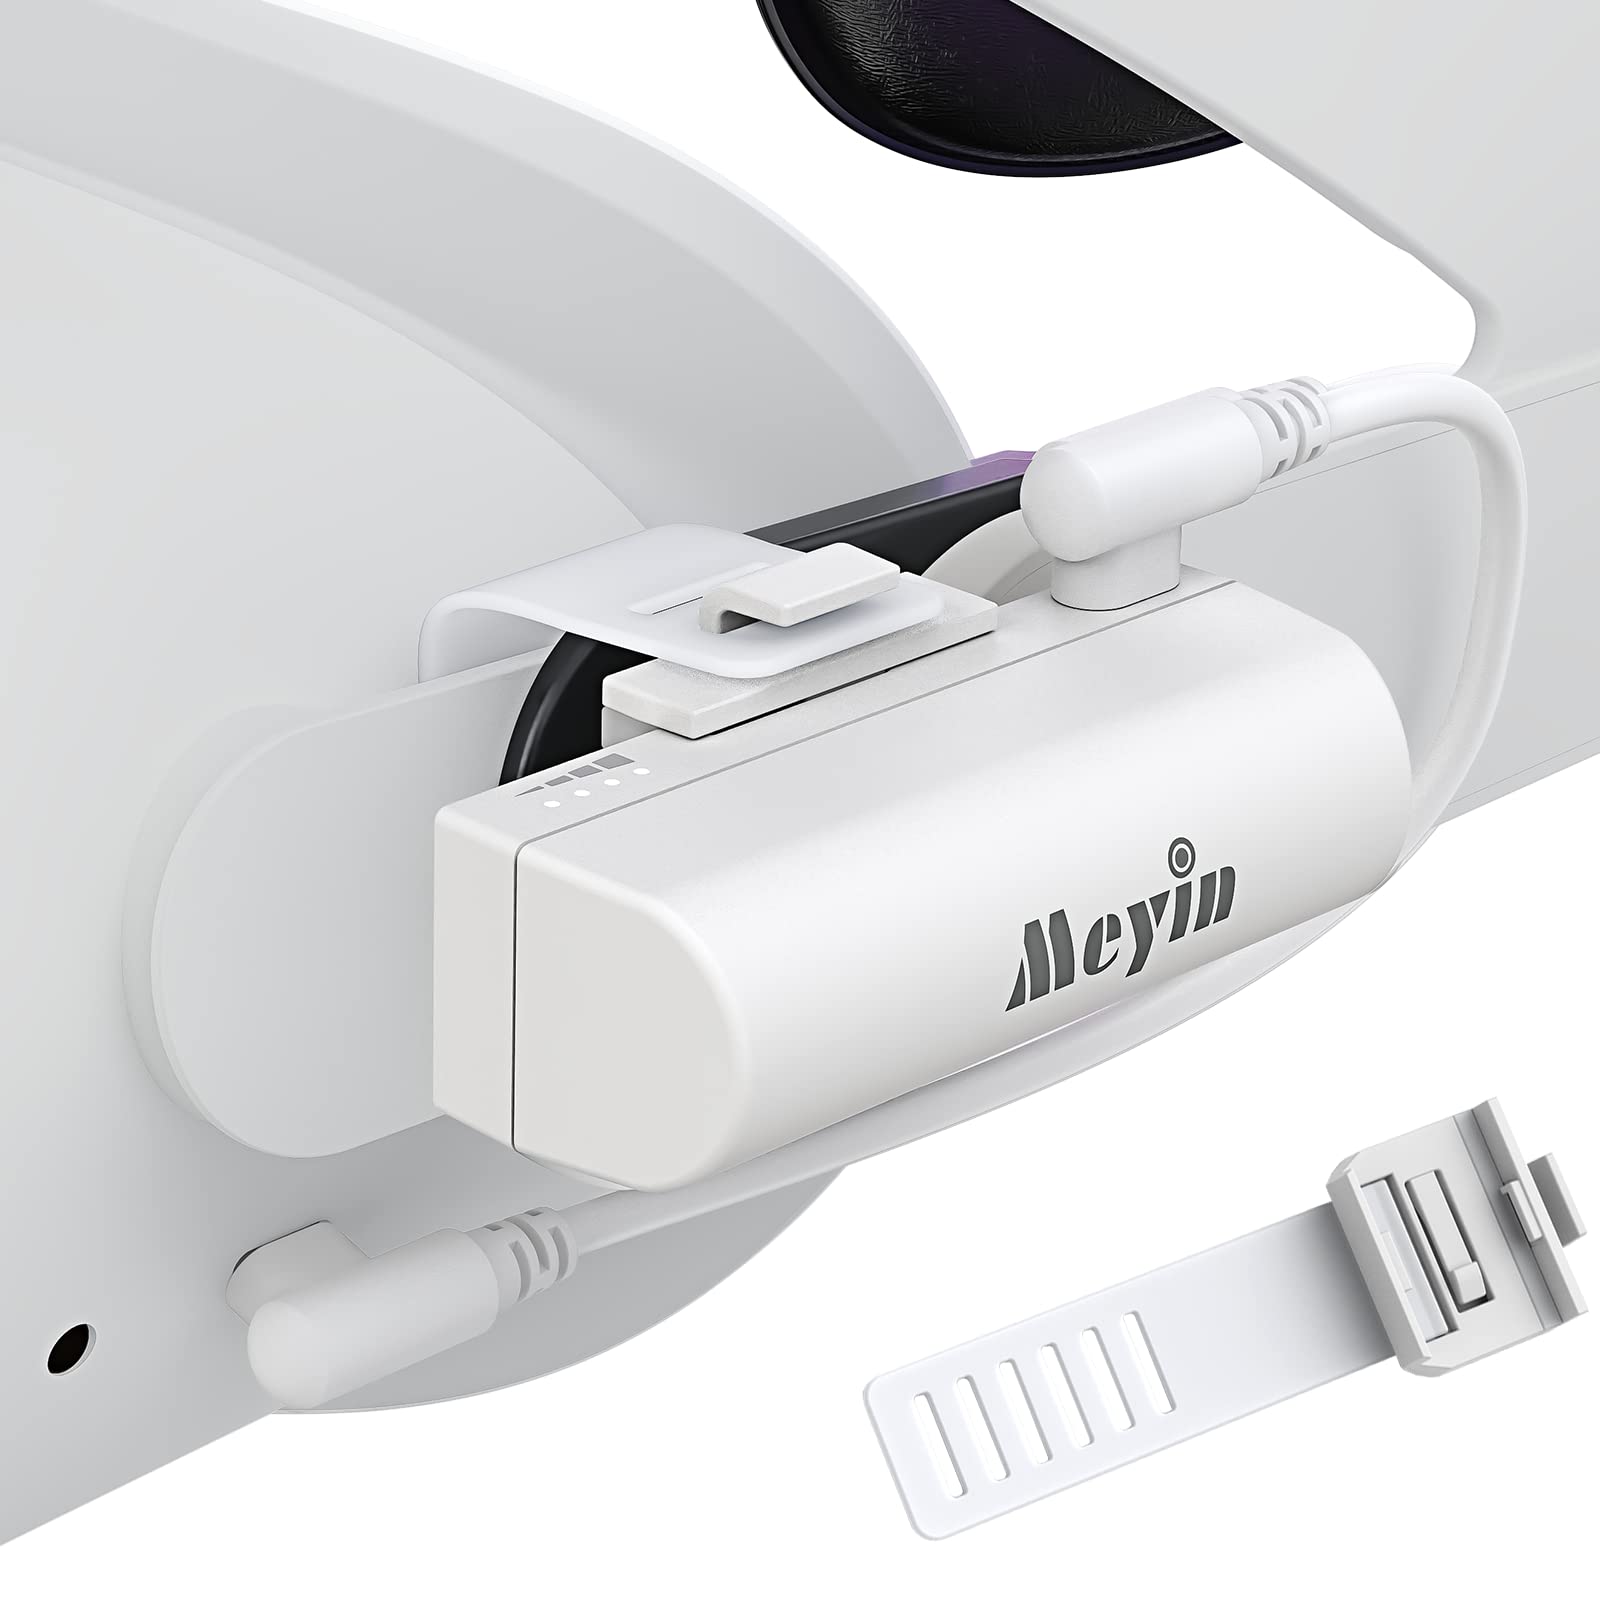 Battery Pack for Oculus Quest 2 and Head Strap, Meyin Q2b 3350mAh for Extra 90min Play Time & Lightweight Enhanced Strap Connection Design Prevent Battery Falling